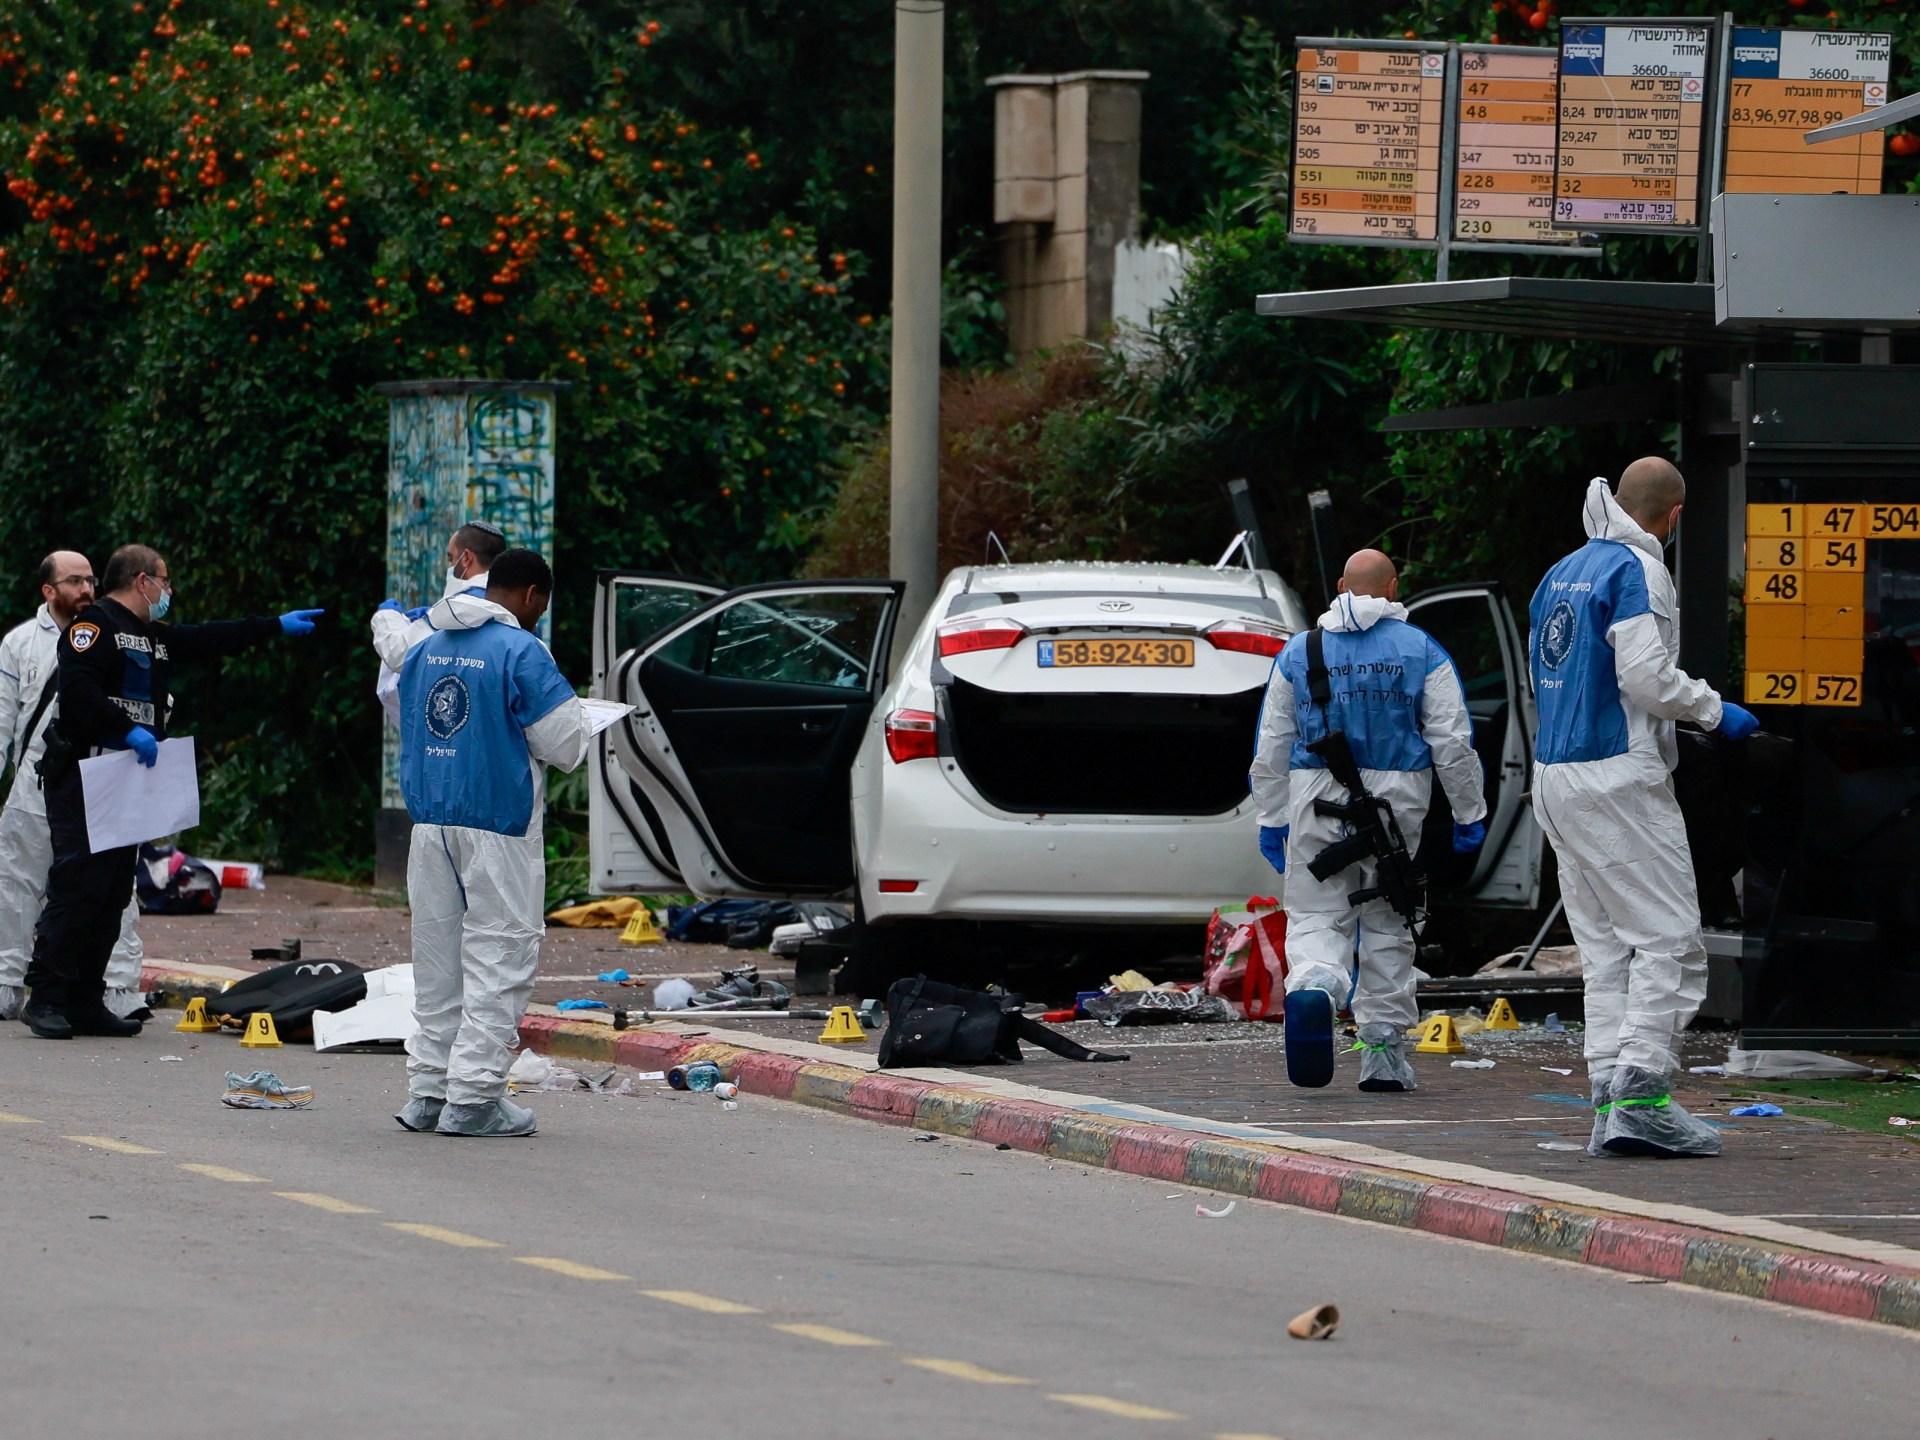 At least one killed, 17 wounded in alleged car-ramming attacks in Israel | News